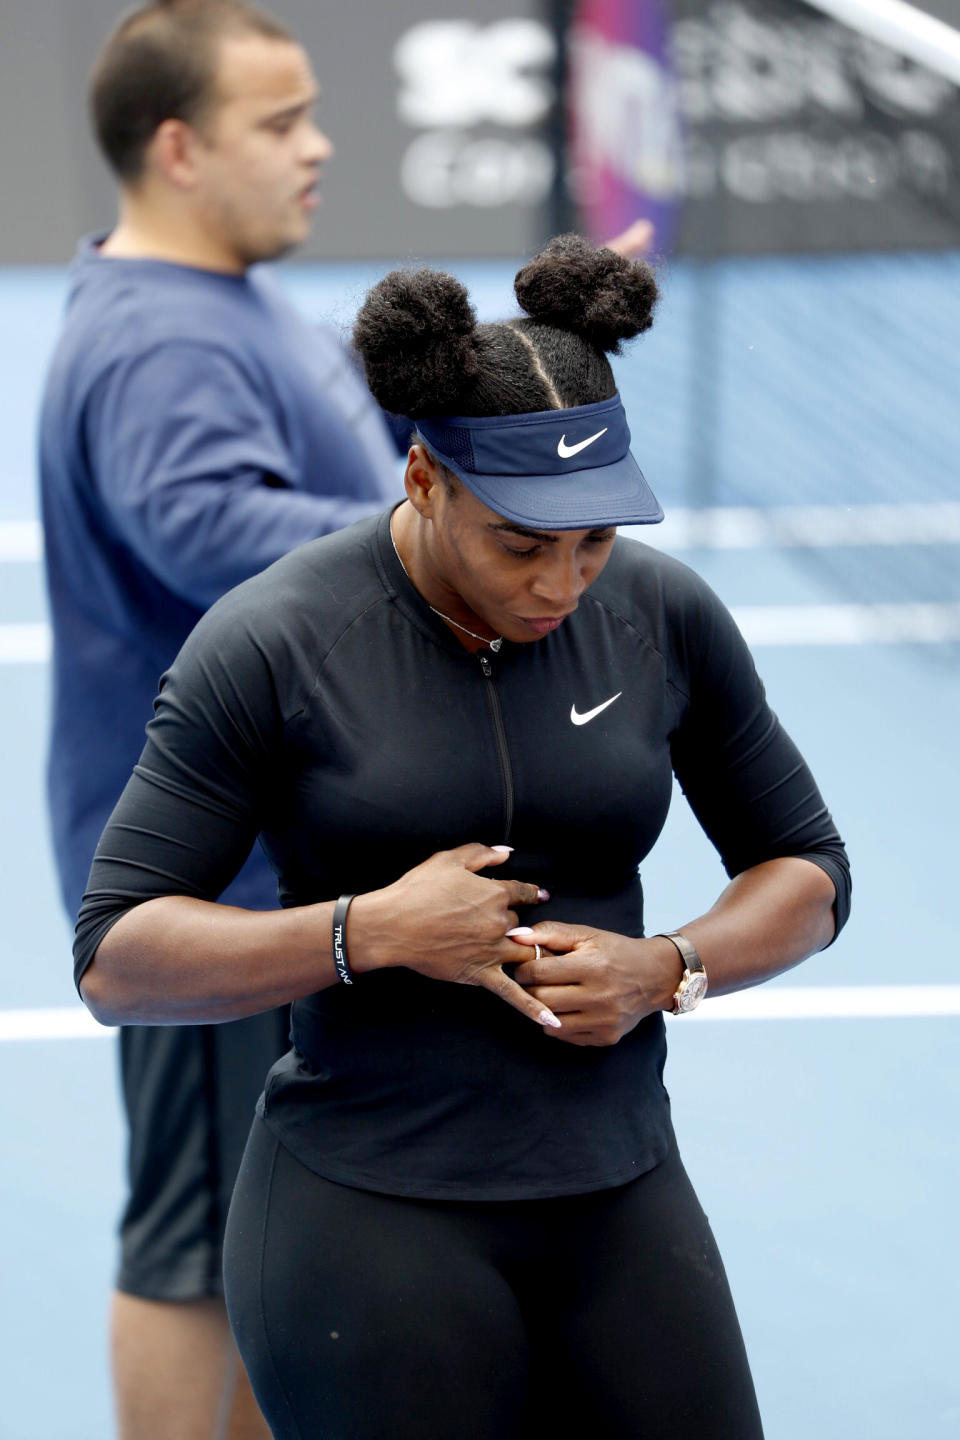 United States' Serena Williams prepares for a practice session at the ASB Classic tennis tournament in Auckland, New Zealand, Friday, Dec. 30, 2016. Williams has announced her engagement to Reddit co-founder Alexis Ohanian. The tennis great posted a poem on the social news website that she accepted his proposal. (Dean Purcell/New Zealand Herald via AP)